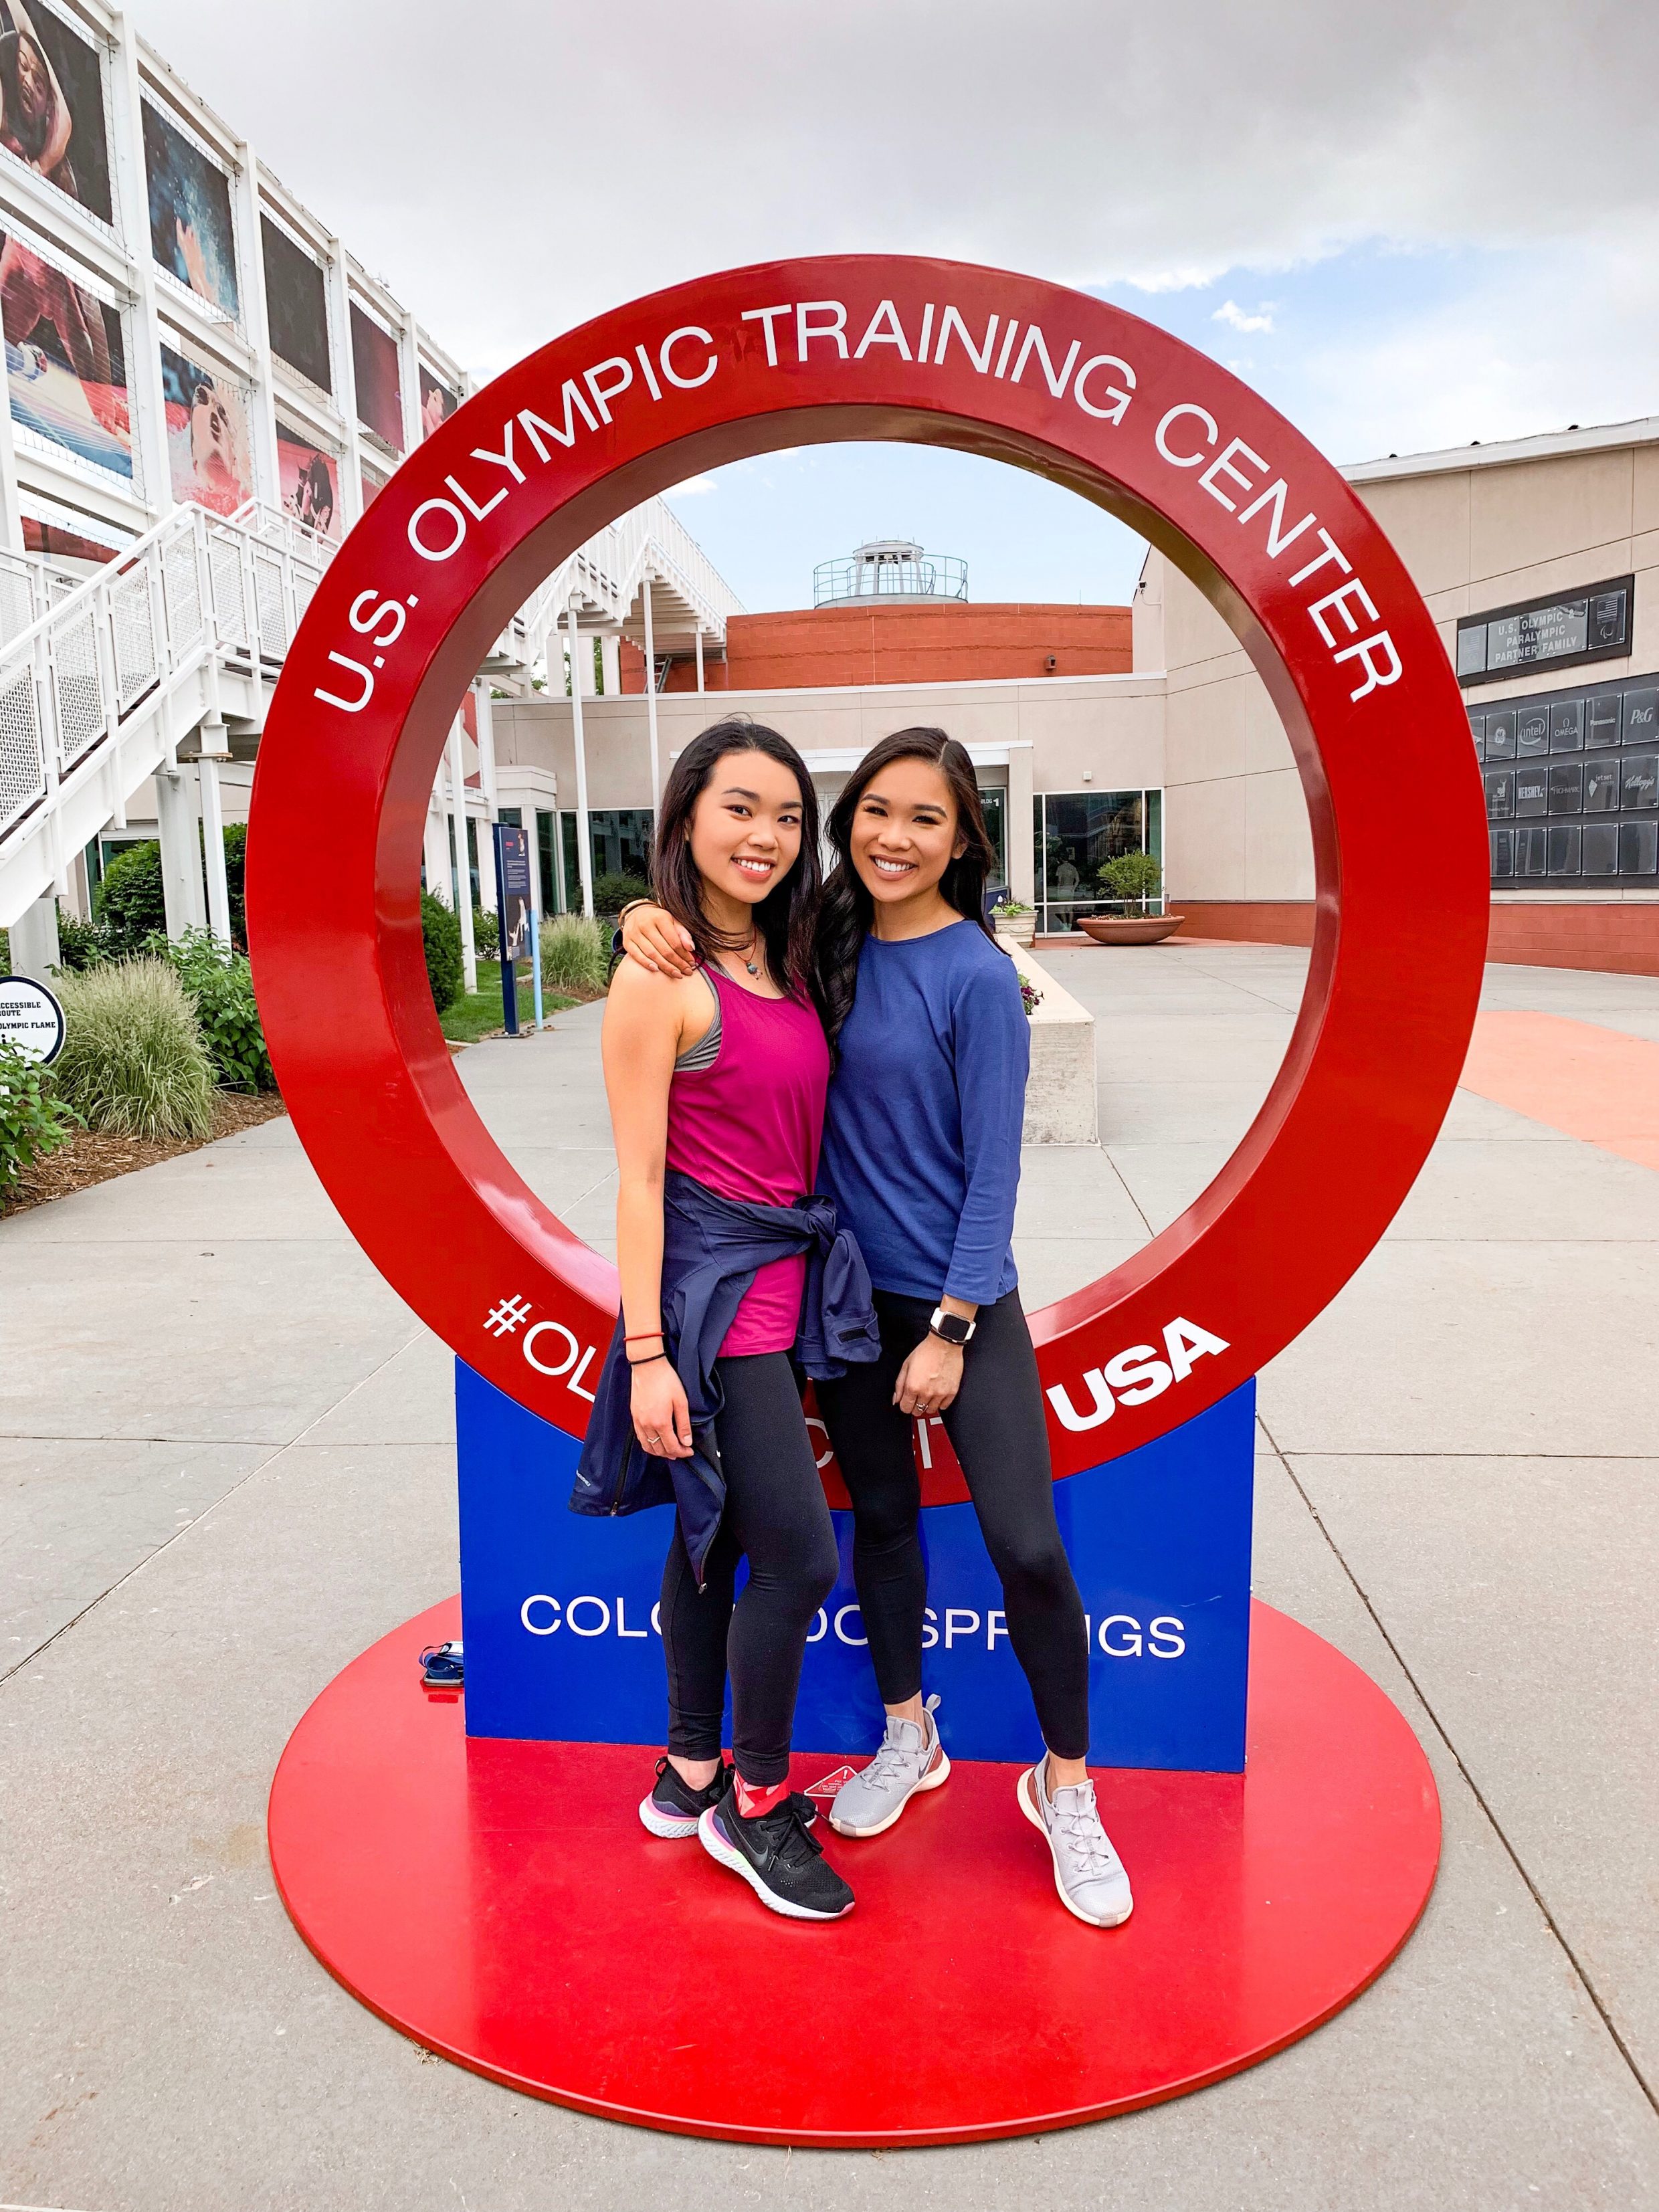 Things to Do in Colorado Springs: Visit the U.S. Olympic Training Center. Hoang-Kim Cung with figure skater Karen Chen